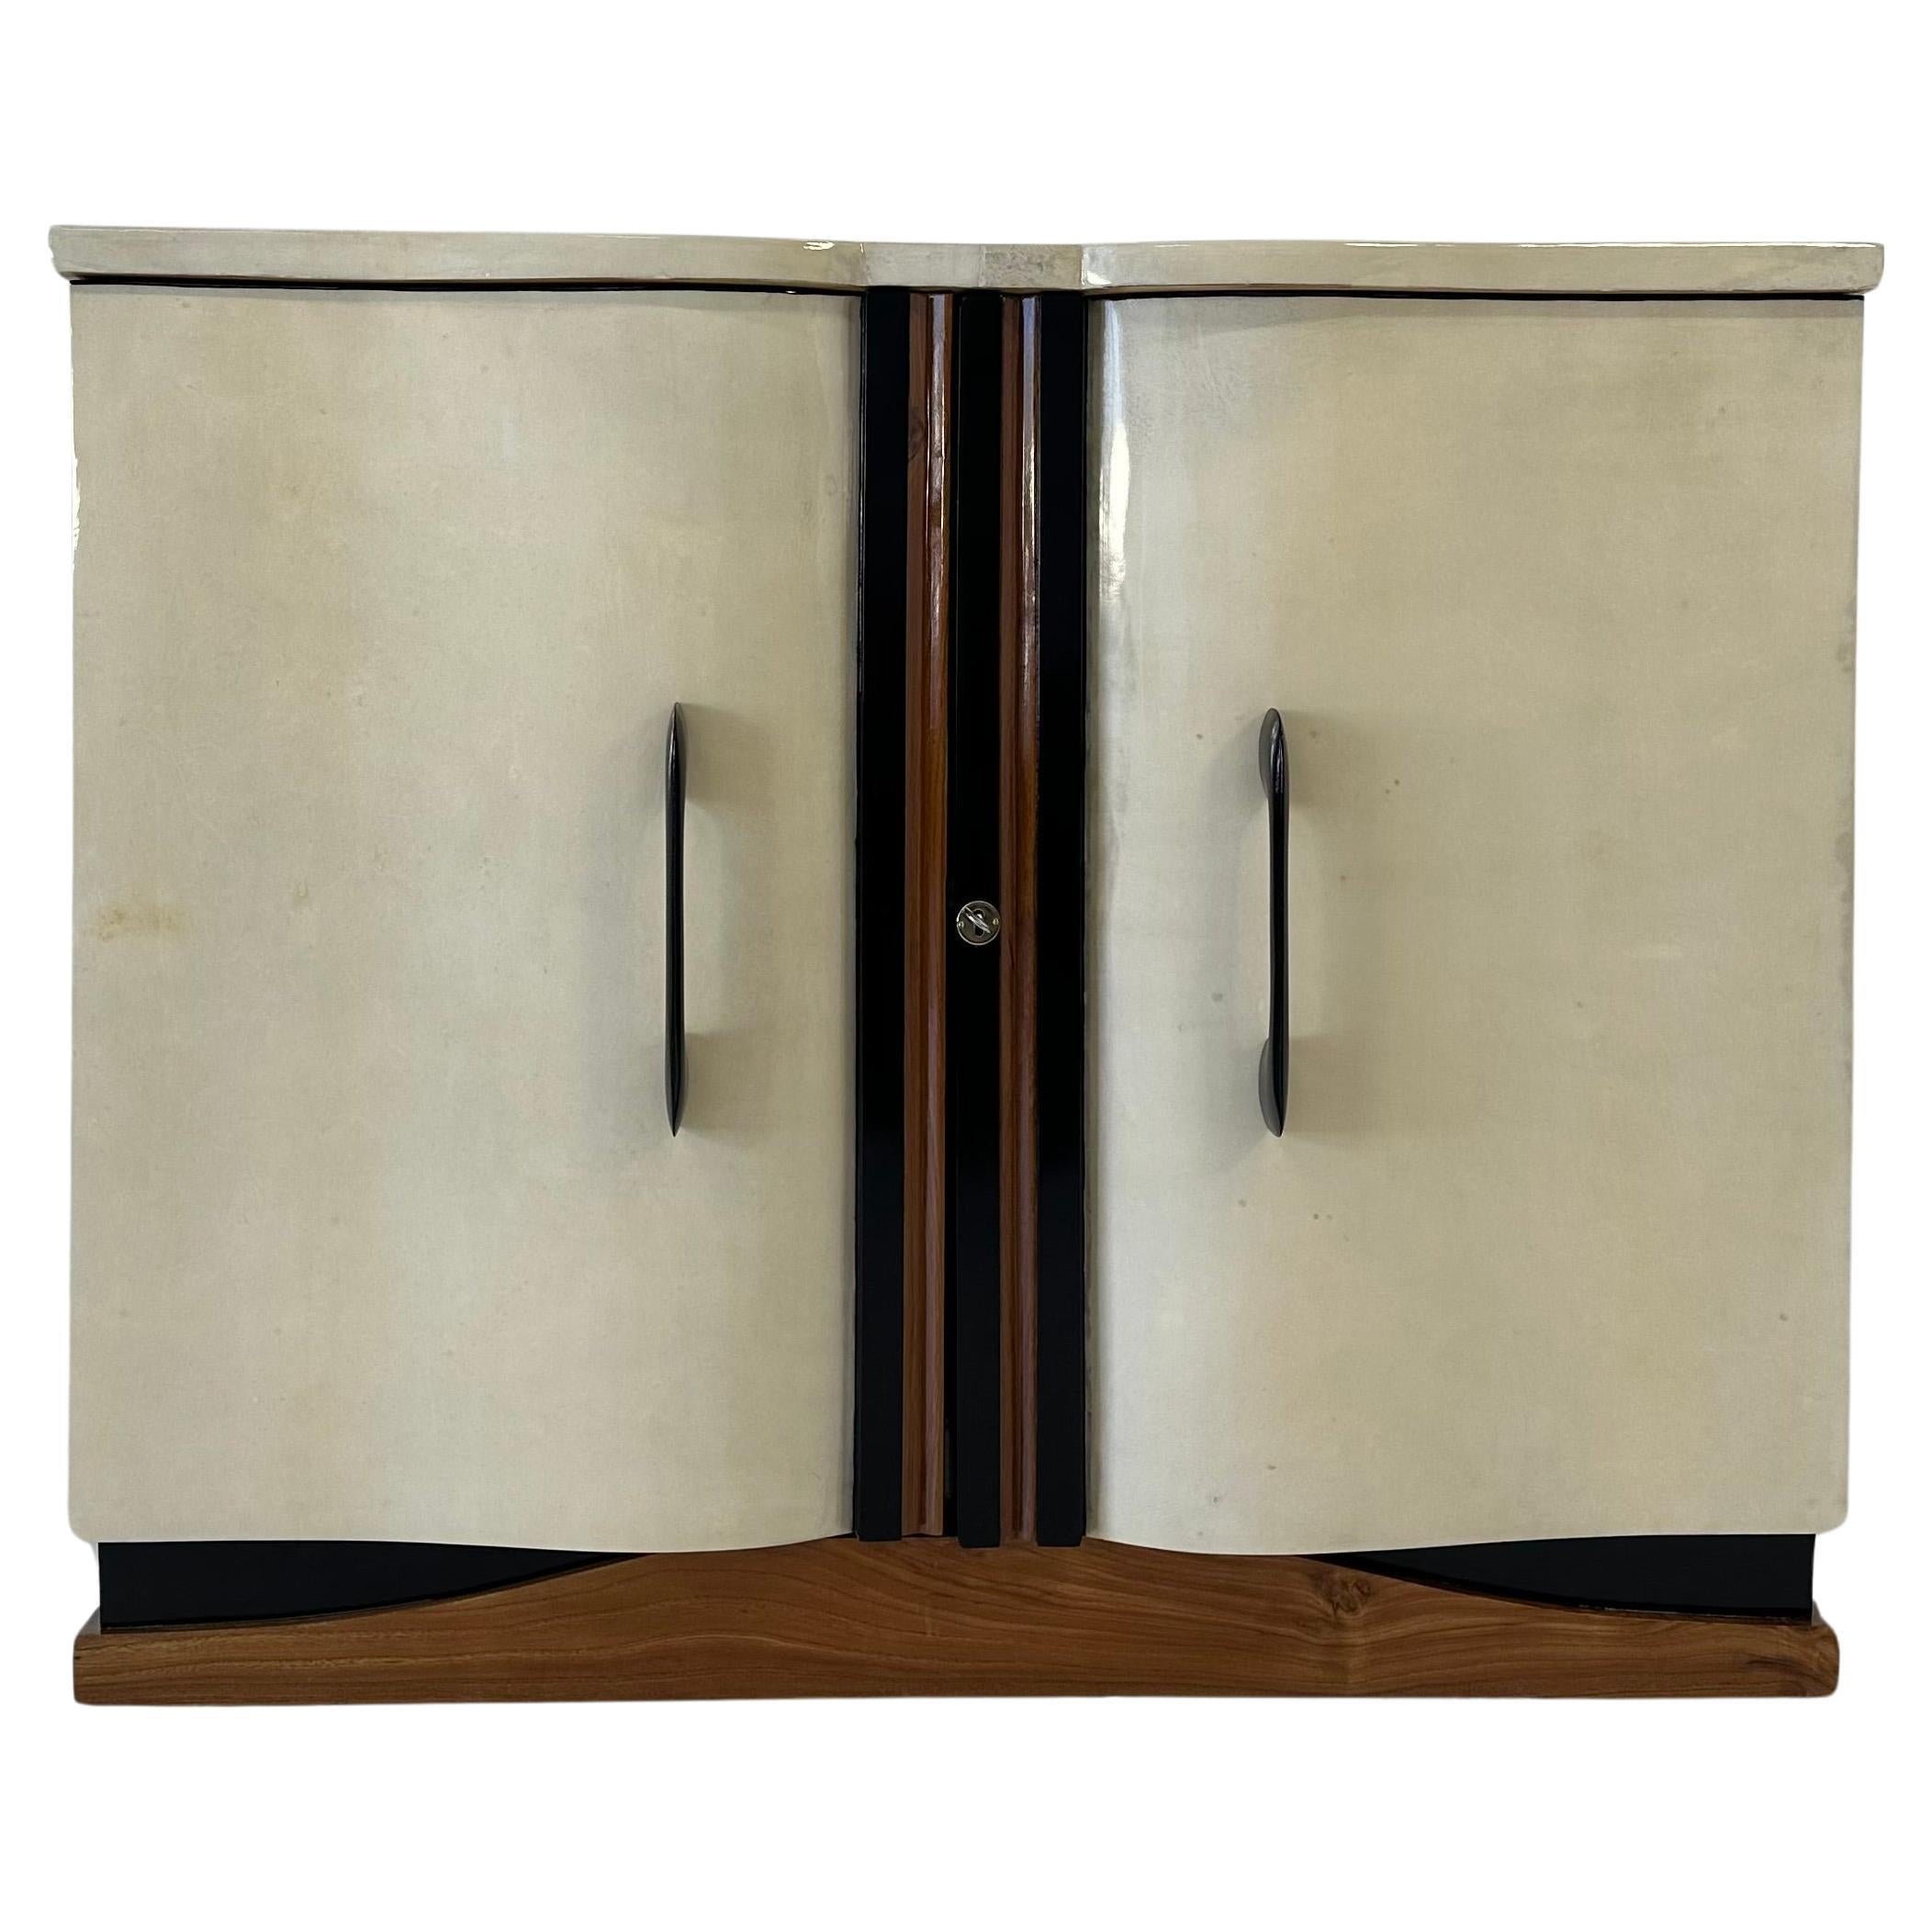 Italian Art Deco Parchment, Walnut and Black Cabinet, Attr. to Ulrich, 1936 For Sale